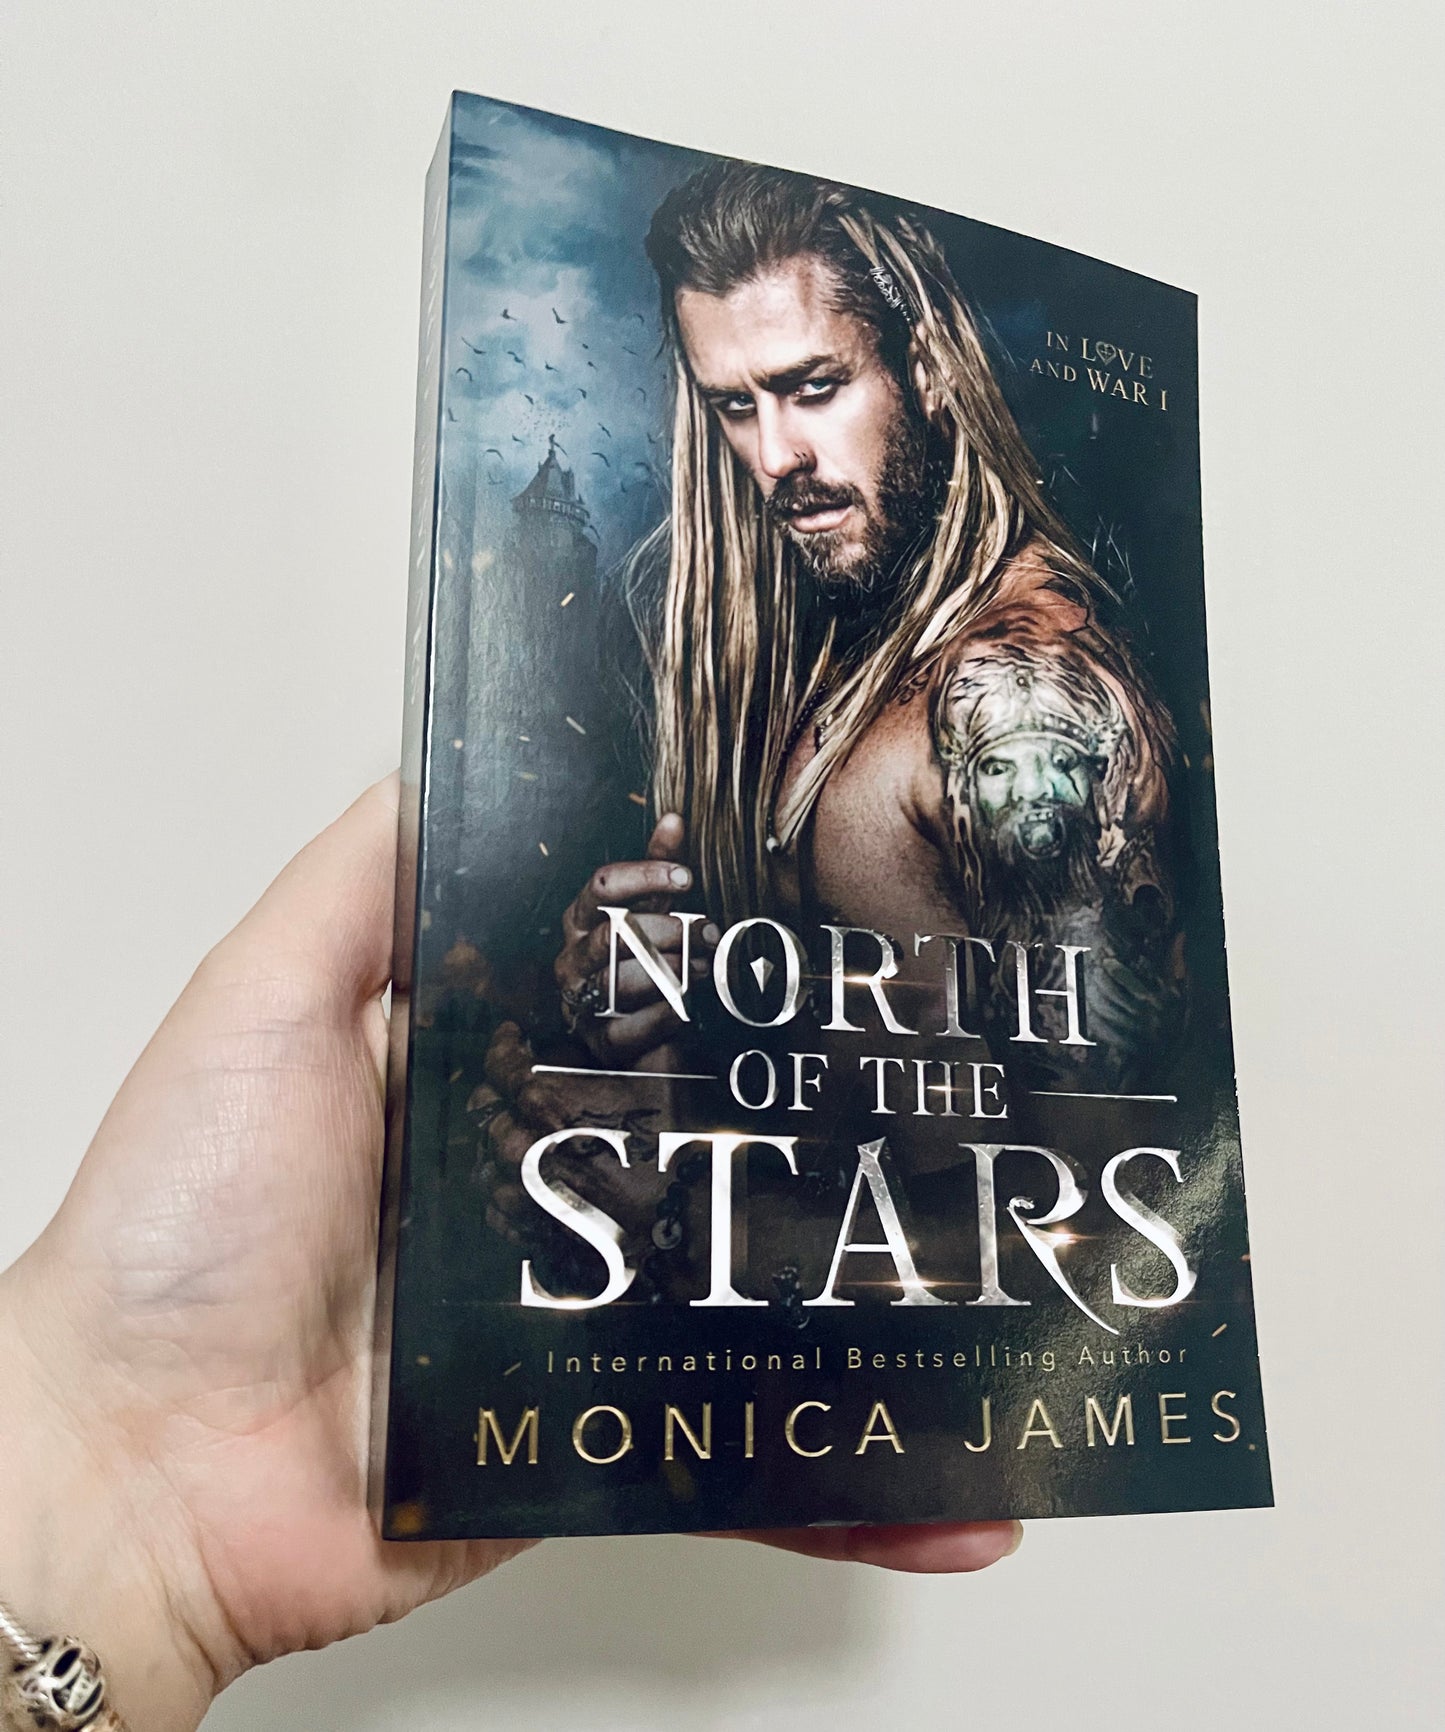 North of the Stars by Monica James  (In Love and War Book 1)